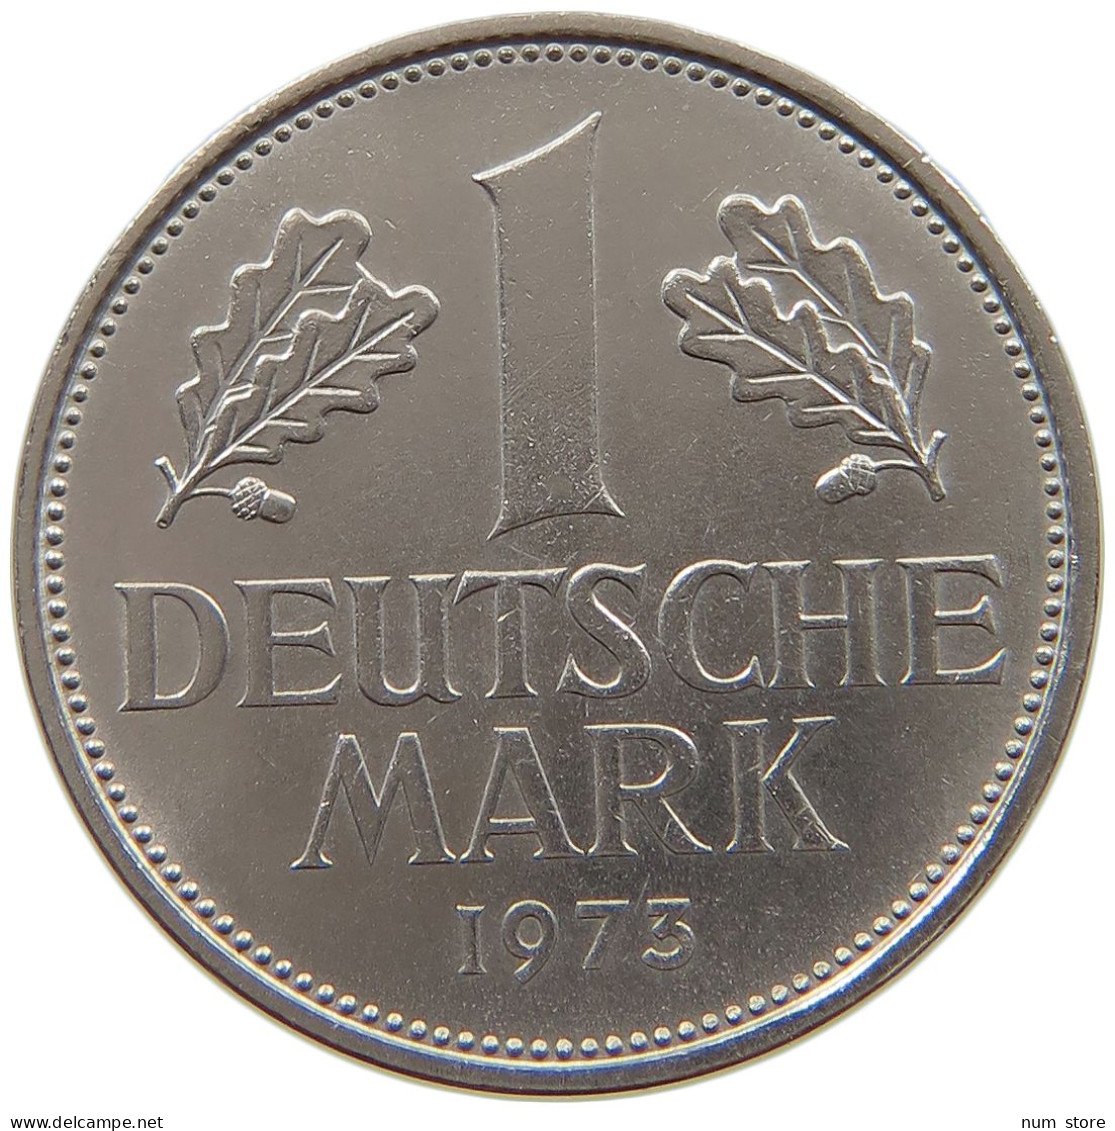 GERMANY WEST 1 MARK 1973 D #a069 0605 - 1 Mark